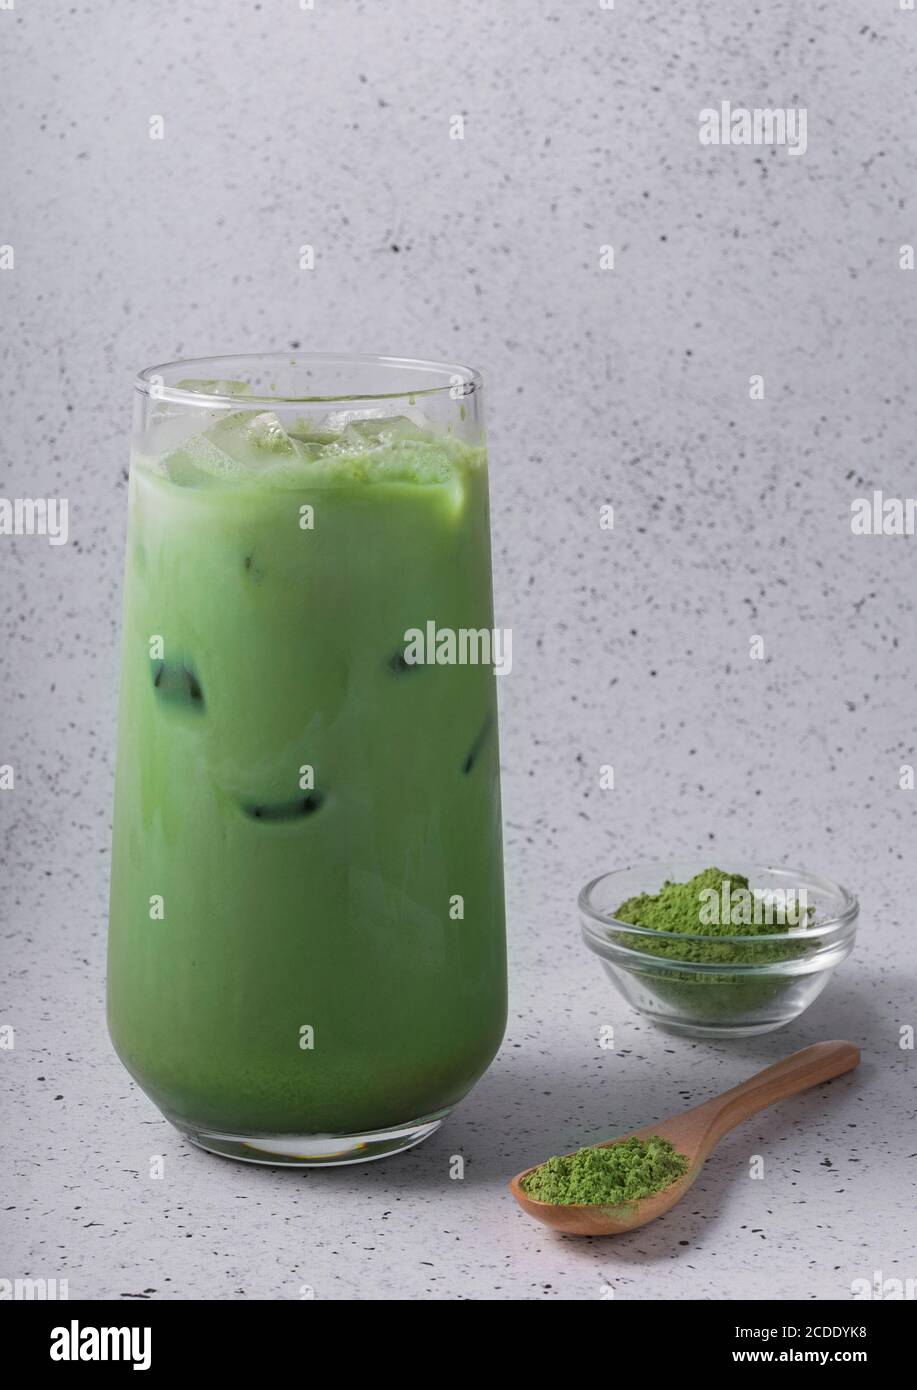 Green tea latte with ice in plastic cup and straw on wooden background.  Homemade Iced Matcha Latte Tea with Milk take away Stock Photo by  ©galitskaya 242393070